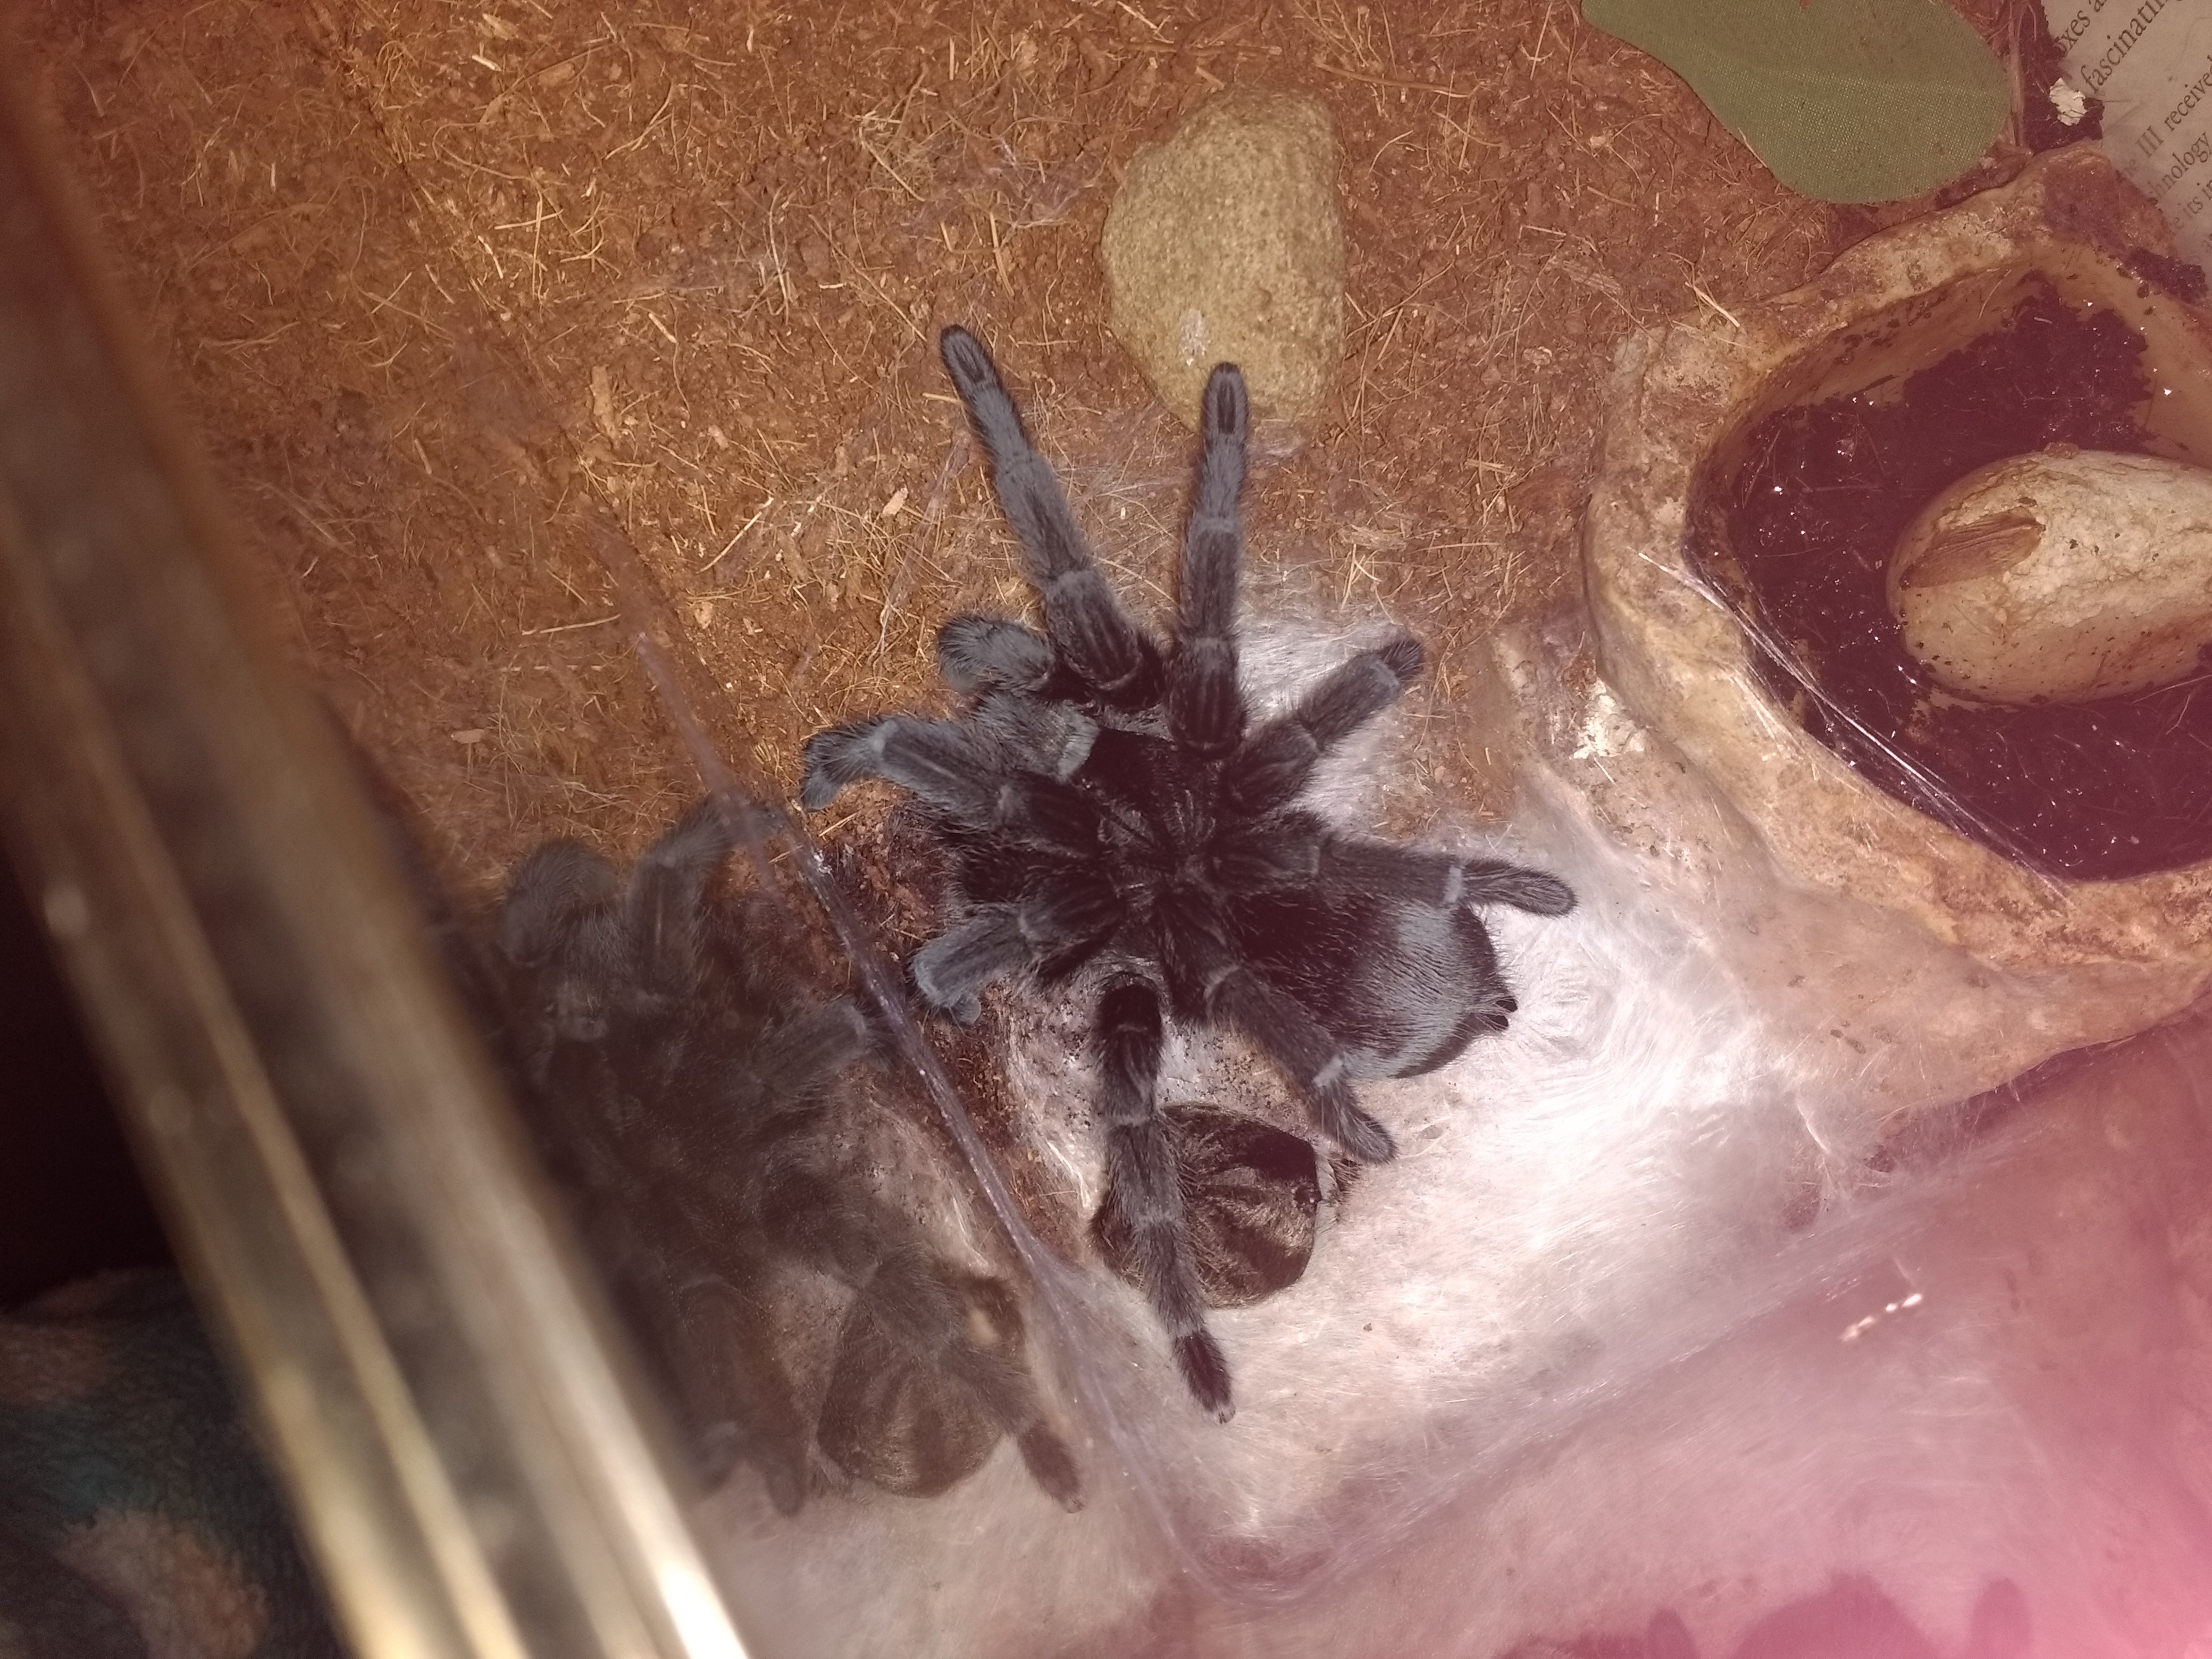 G Pulchra after molting